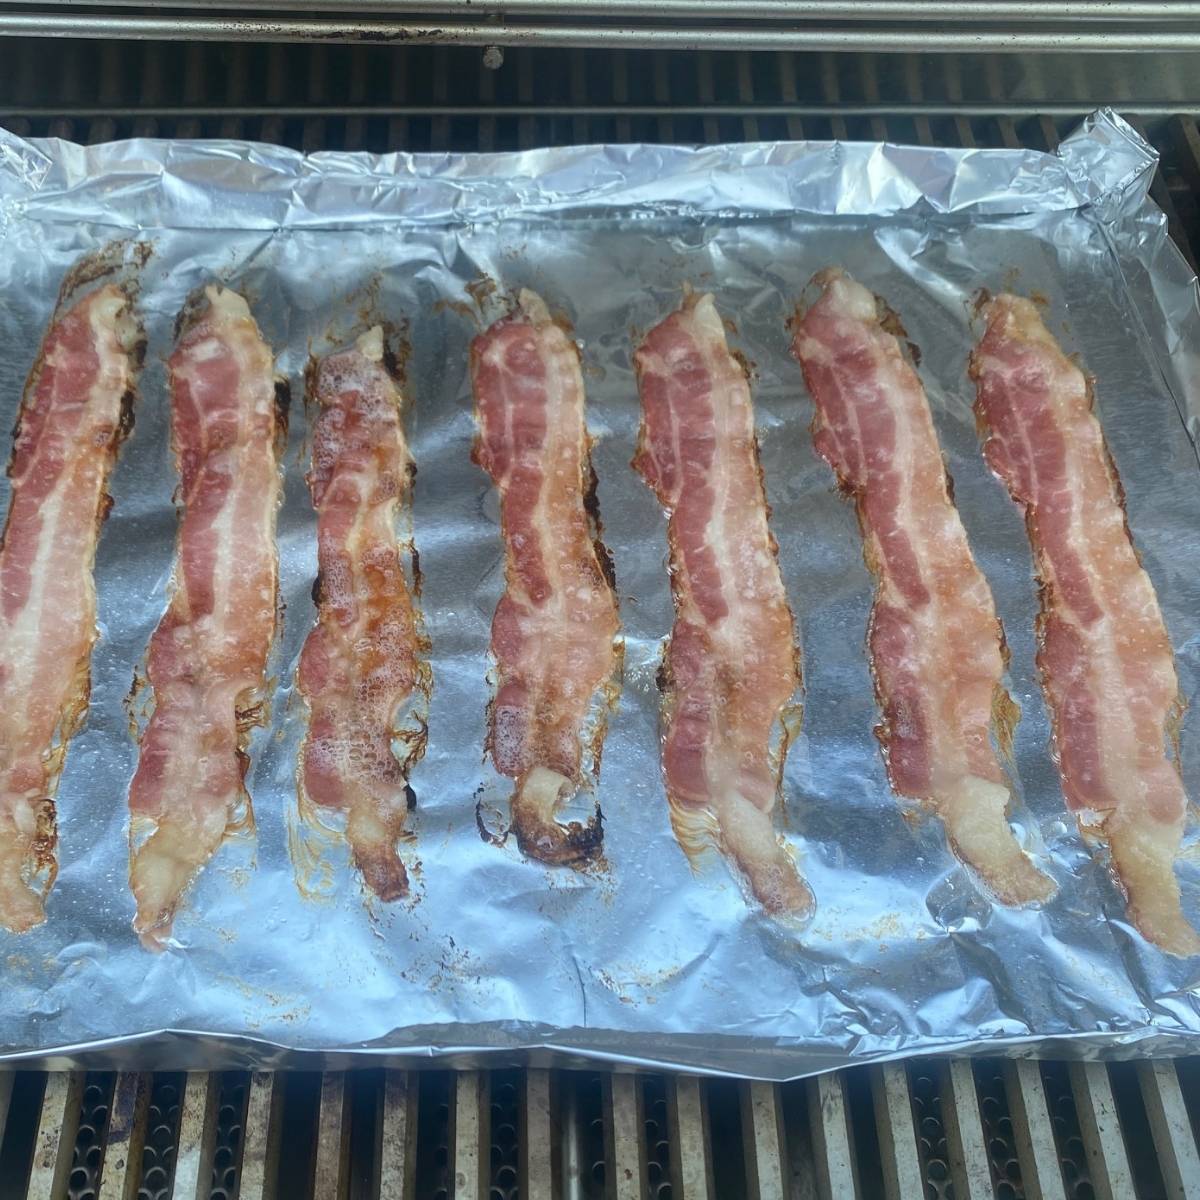 https://www.thewickednoodle.com/wp-content/uploads/2022/09/bacon-on-a-grill-foil.jpg